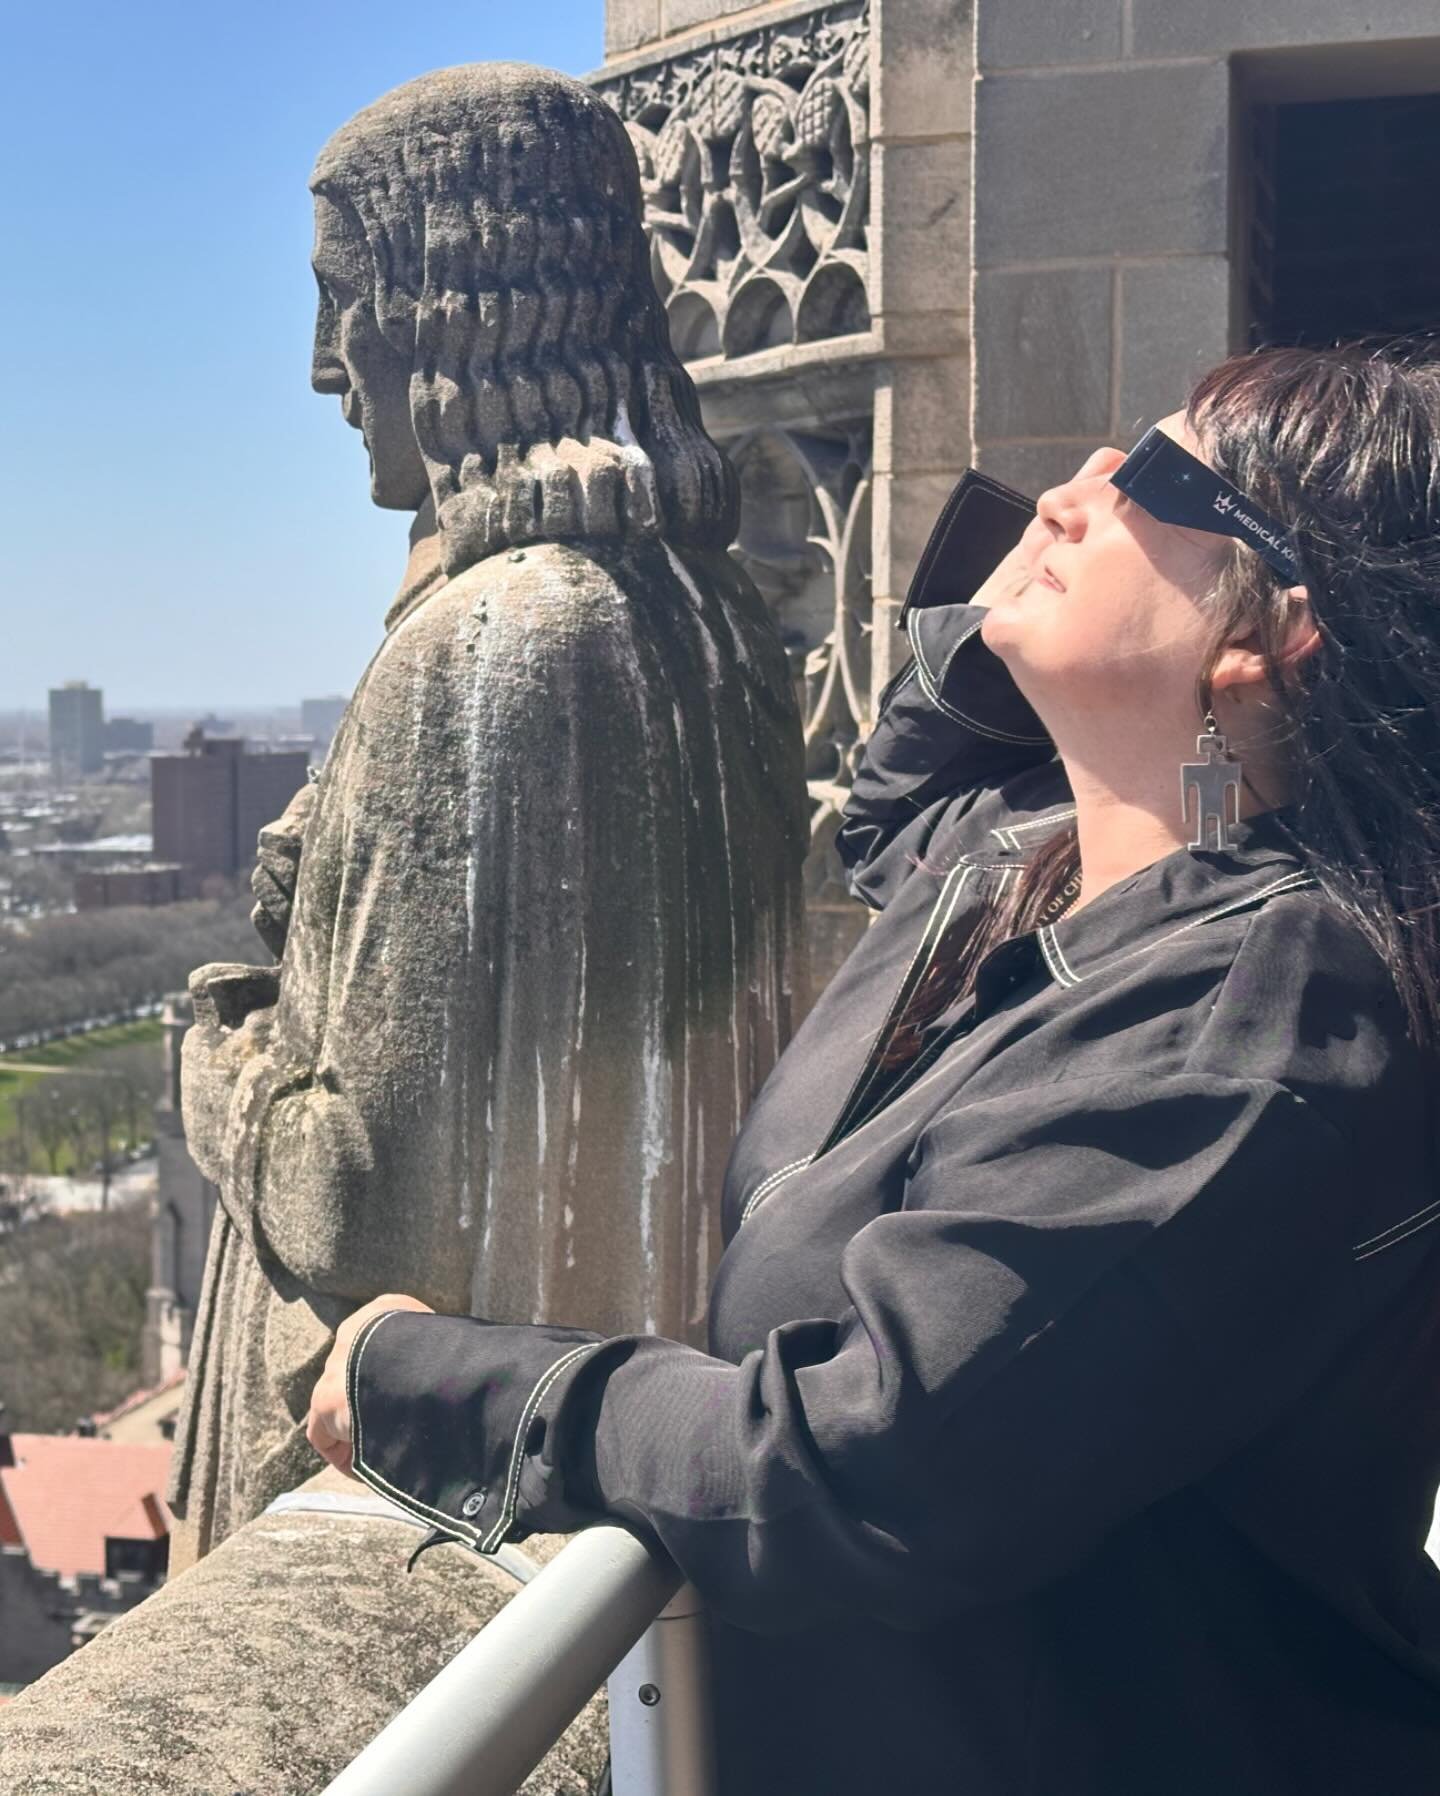 A #sacred experience in a #sacred place.
.
.
.
#solareclipse2024 #eclipse #blackholesun #⚫️ #rockefellerchapel #chicago #cityviews #skyline #searchforthesacred #lauriebuman